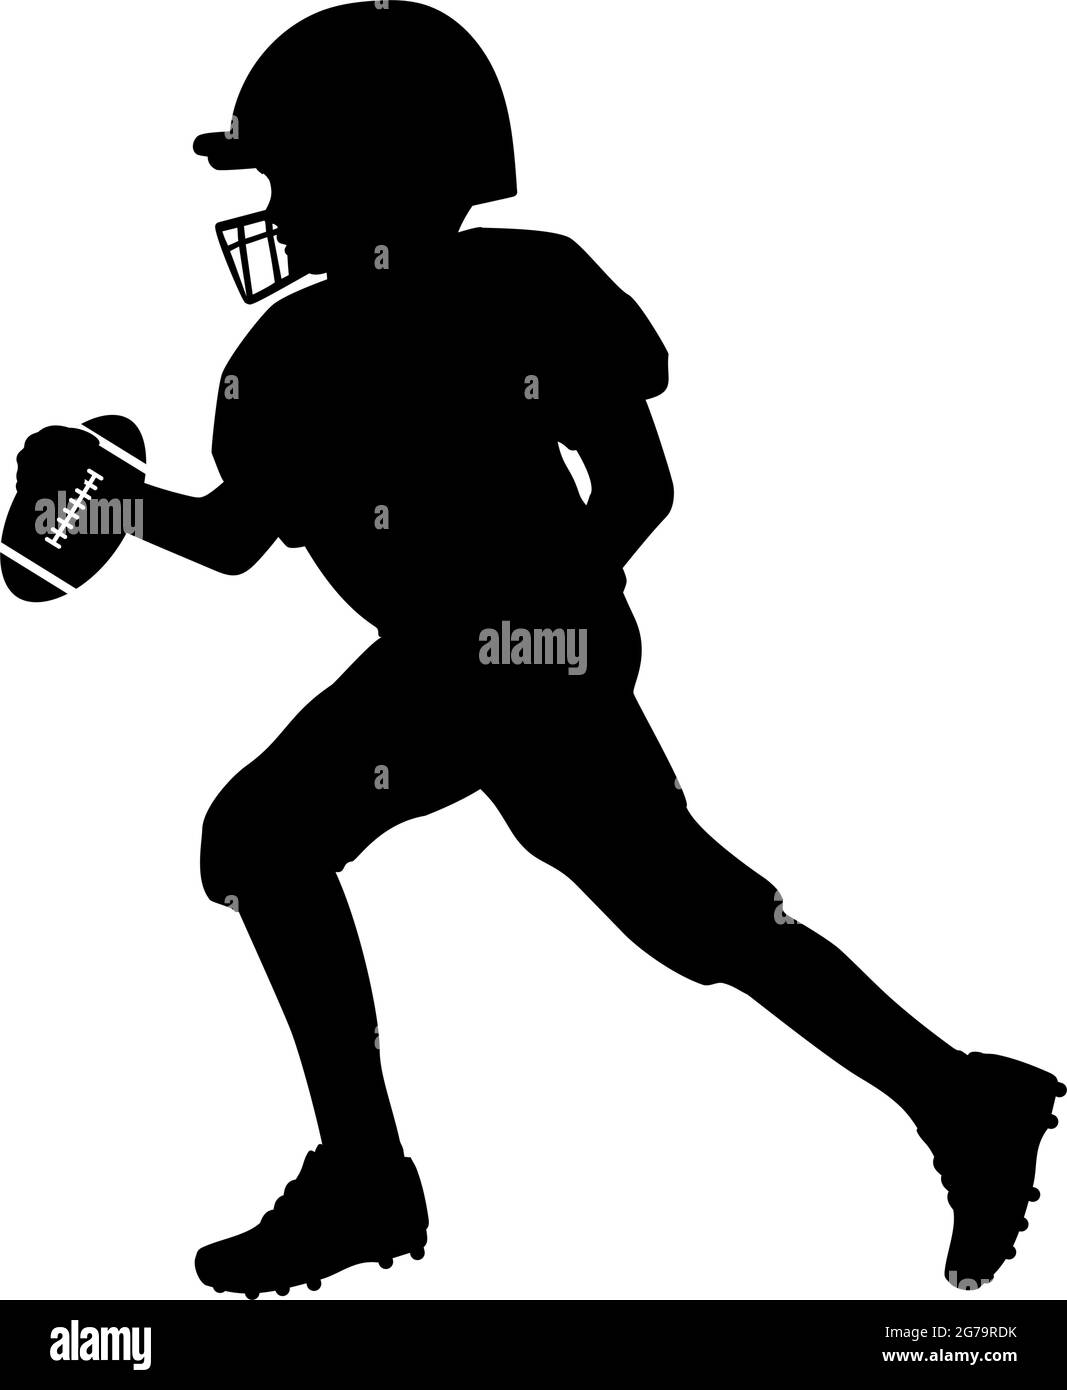 Silhouette American football player running boy with ball. Symbol sport. Illustration icon logo Stock Vector